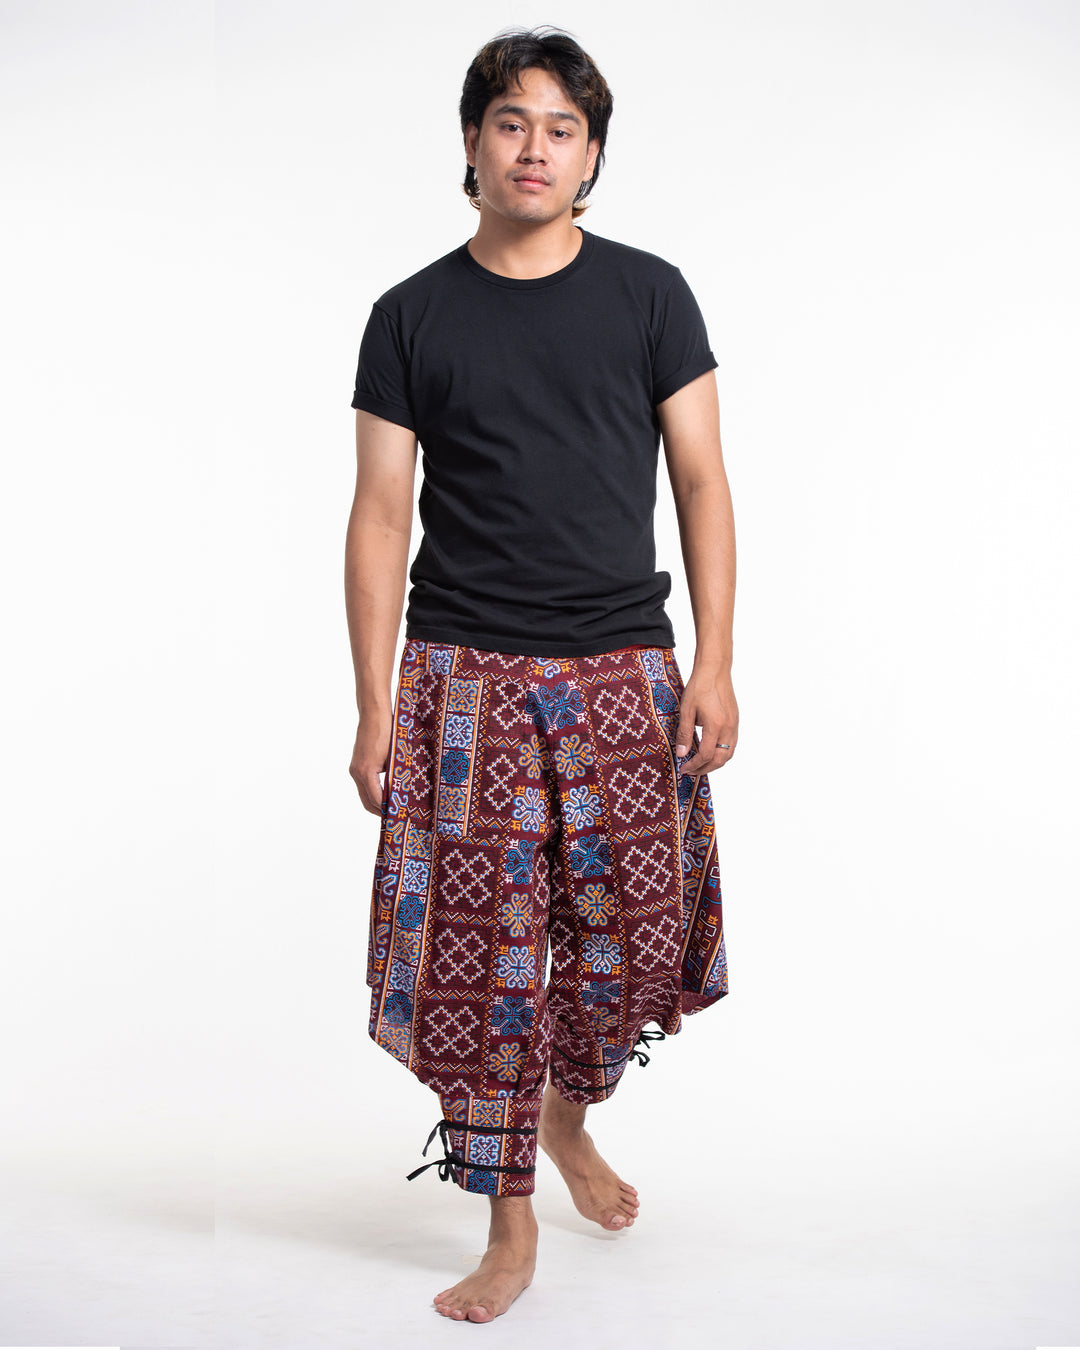 Clovers Thai Hill Tribe Fabric Men's Harem Pants with Ankle Straps in